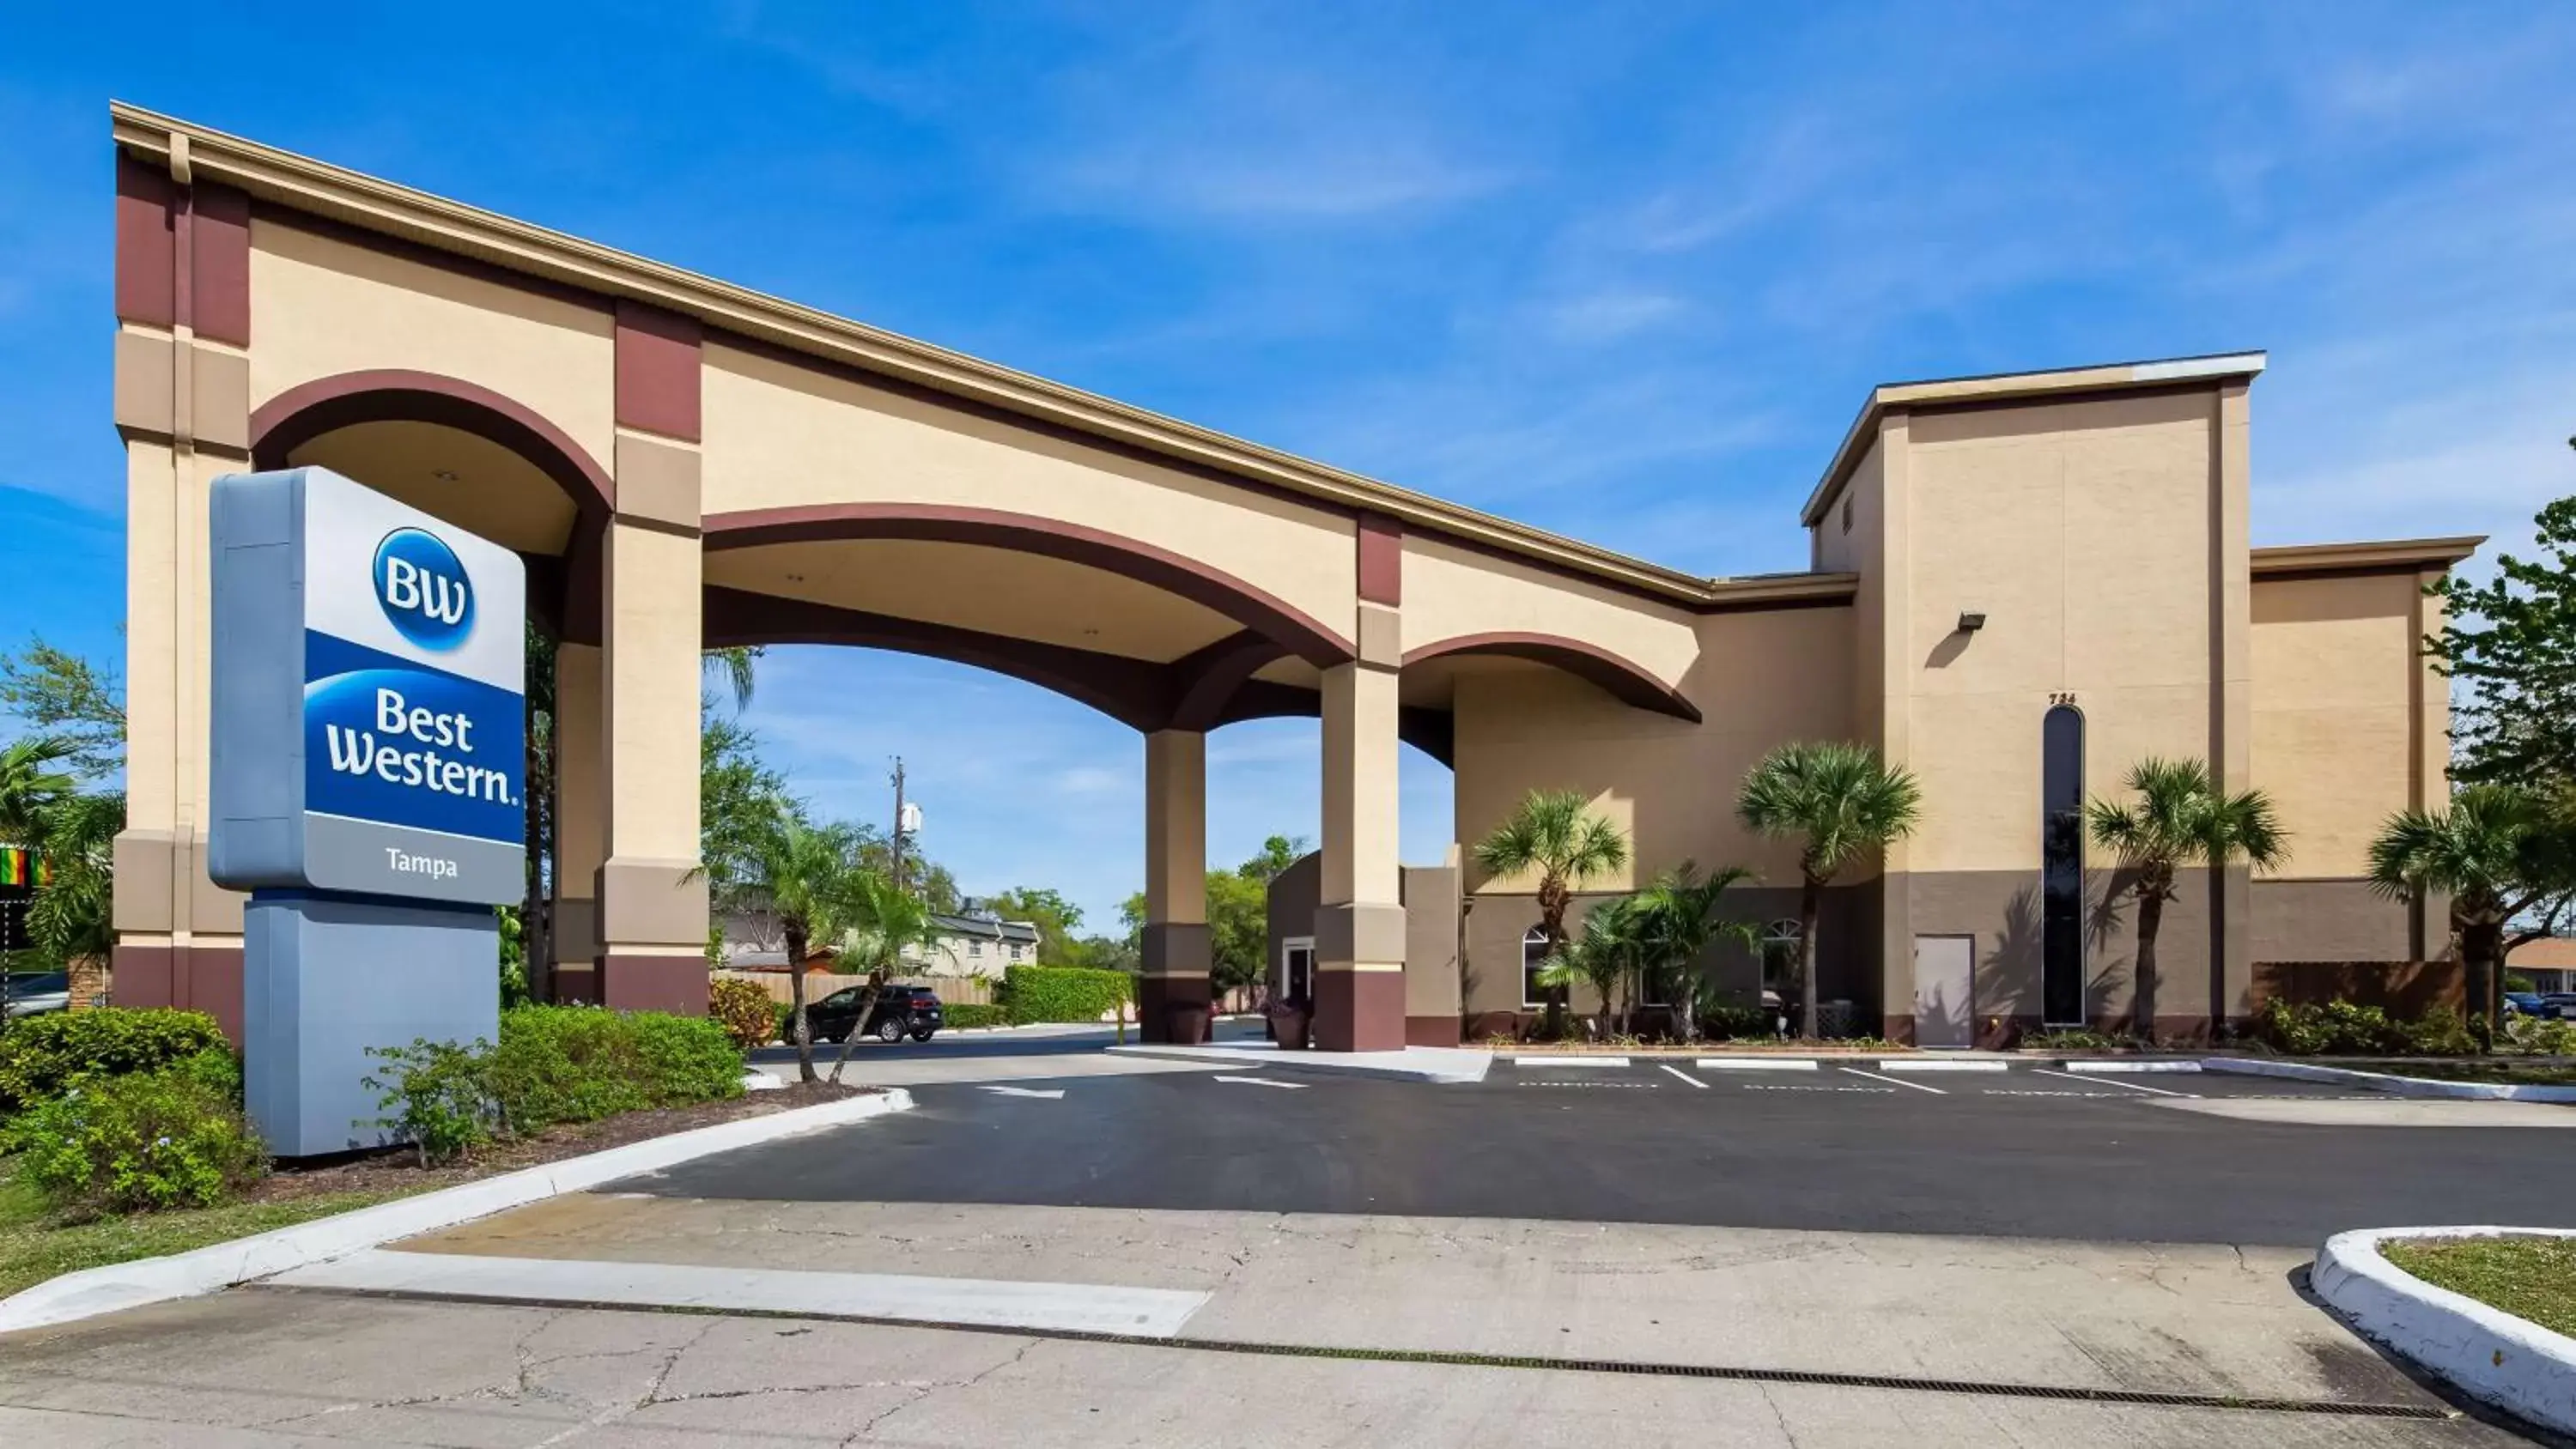 Property building in Best Western Tampa